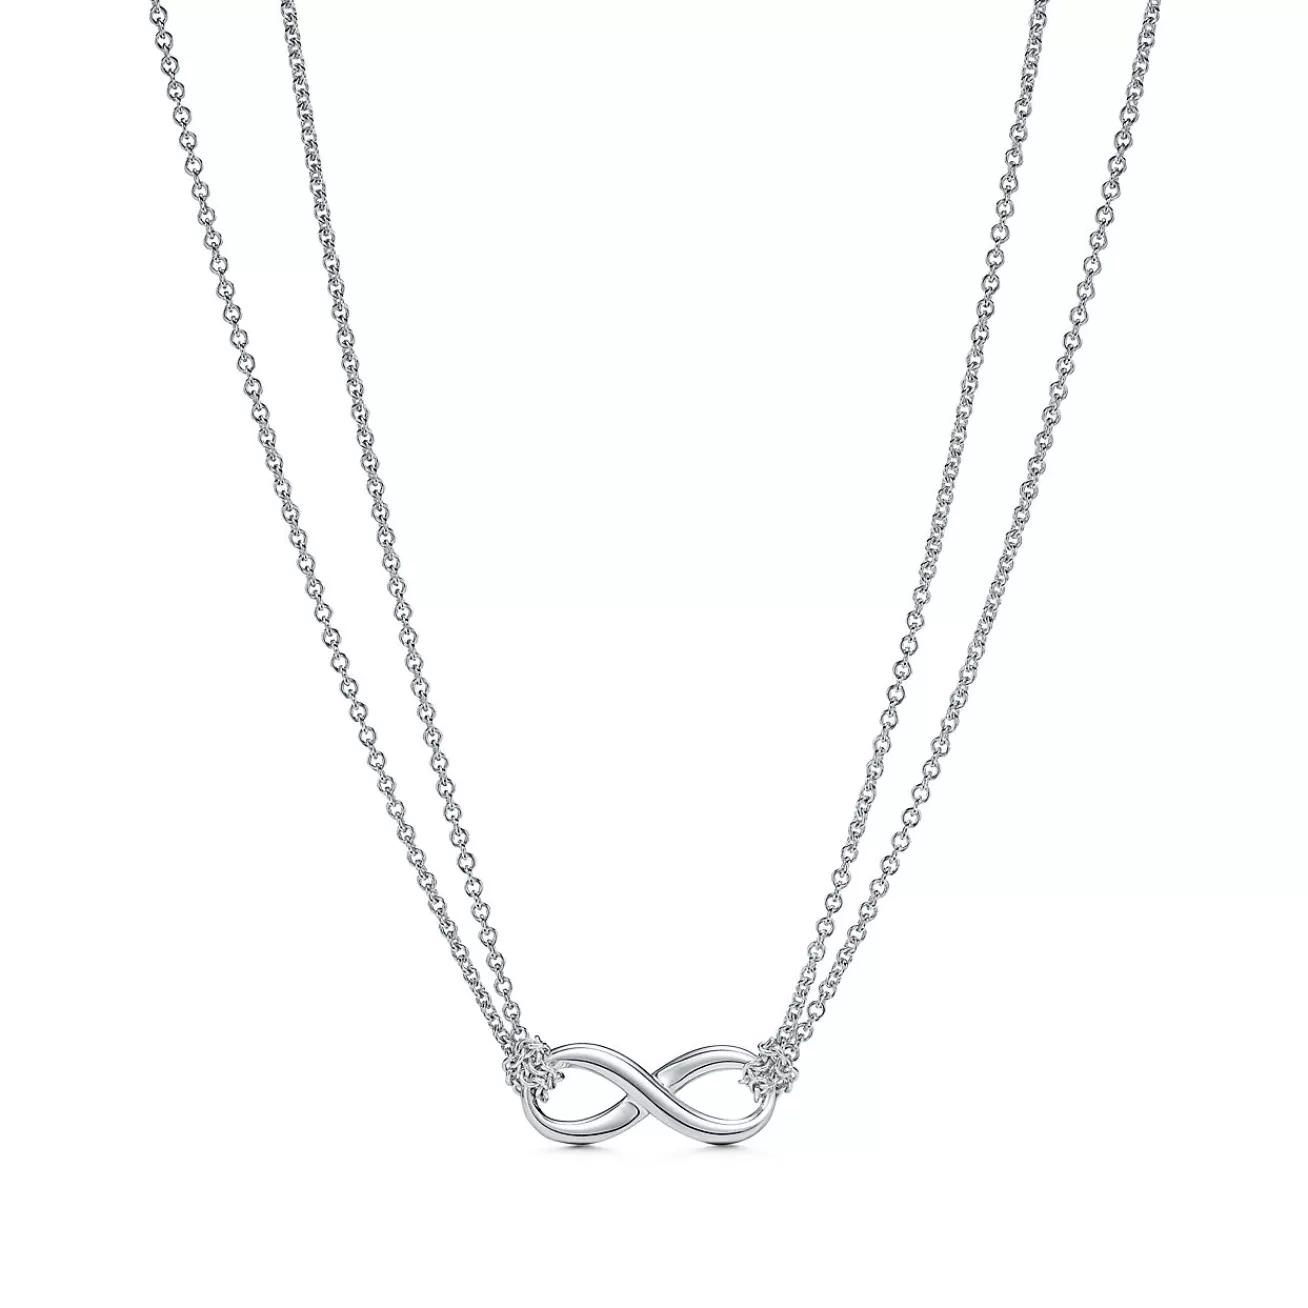 Tiffany & Co. Tiffany Infinity pendant in sterling silver on a 18" chain. | ^ Necklaces & Pendants | Gifts for Her